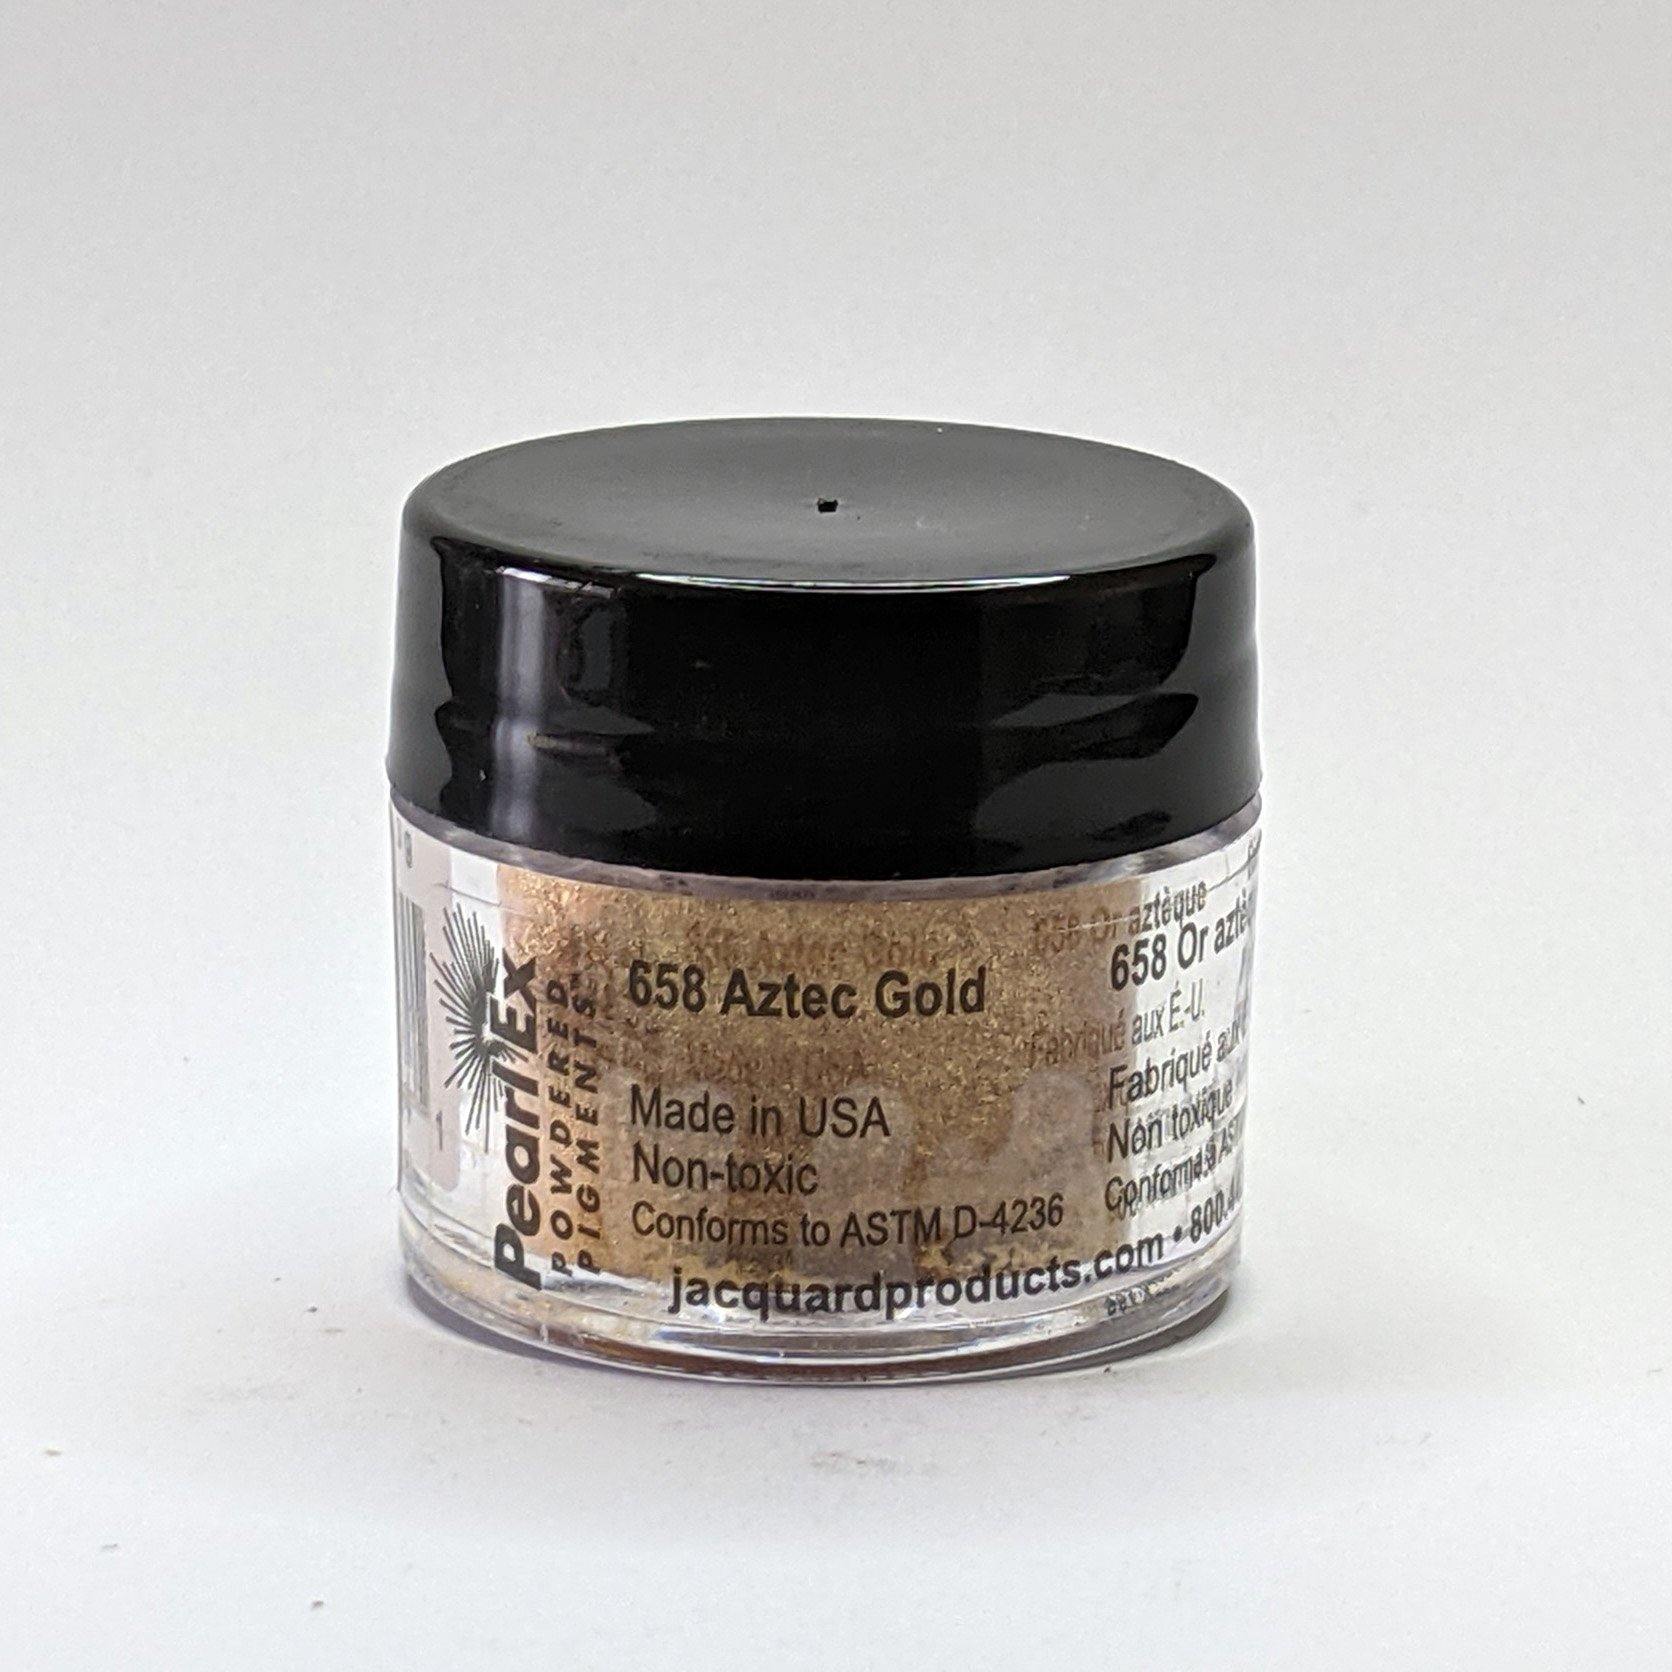 Aztec Gold Pearl Ex Pigment 3g - Poethan